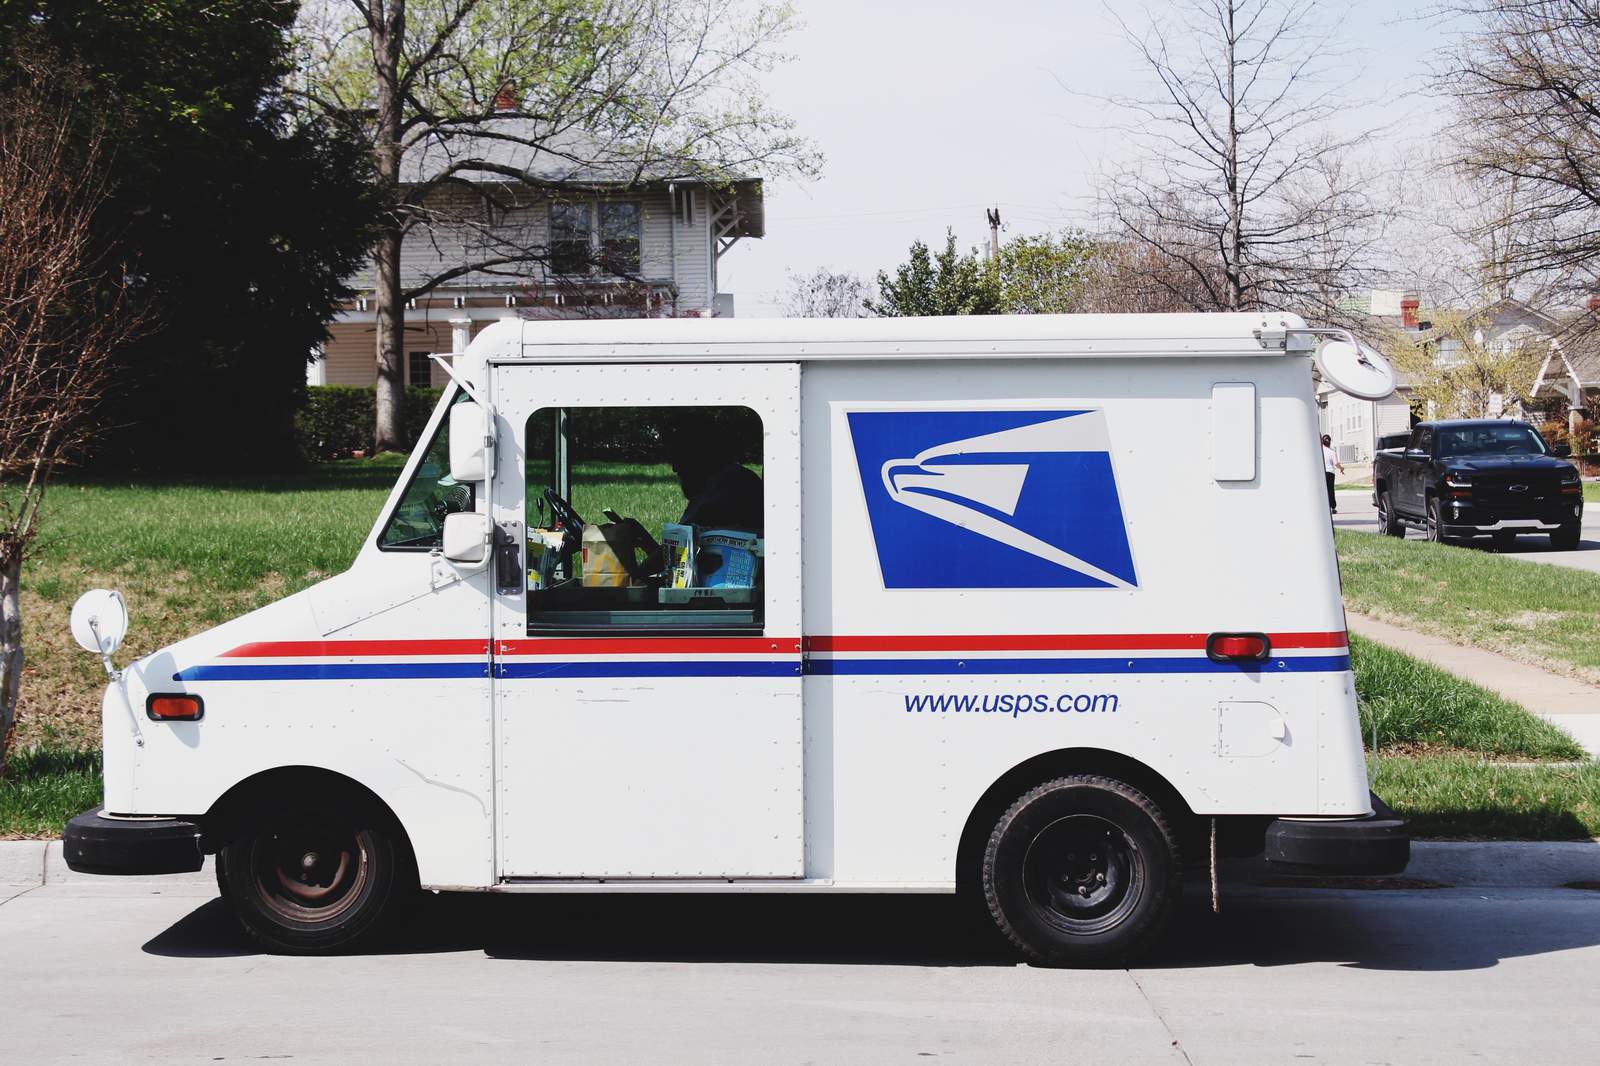 Houston had the most dog attacks of postal workers in the country in 2019